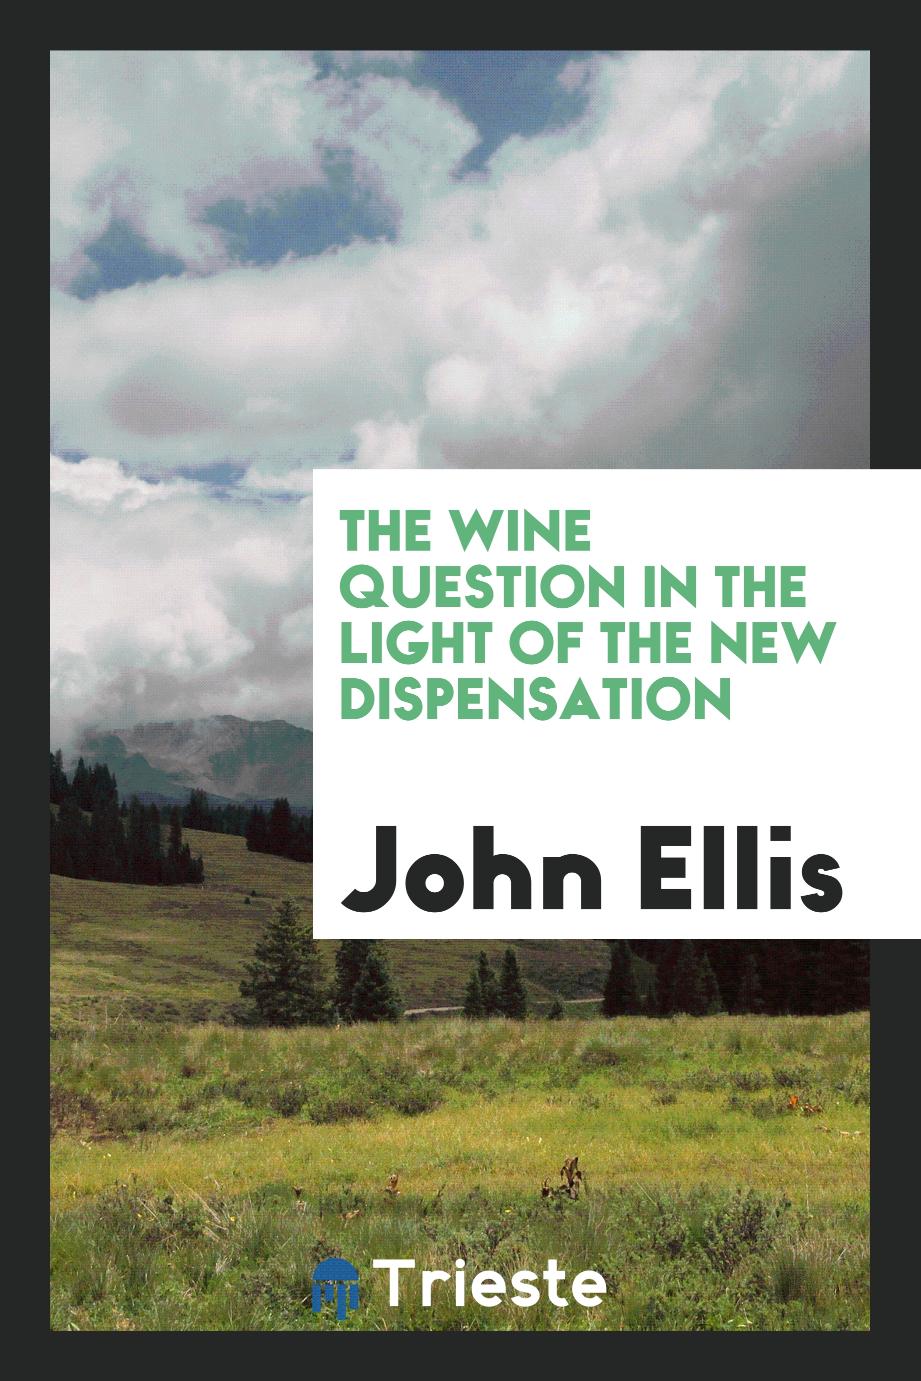 The Wine Question in the Light of the New Dispensation